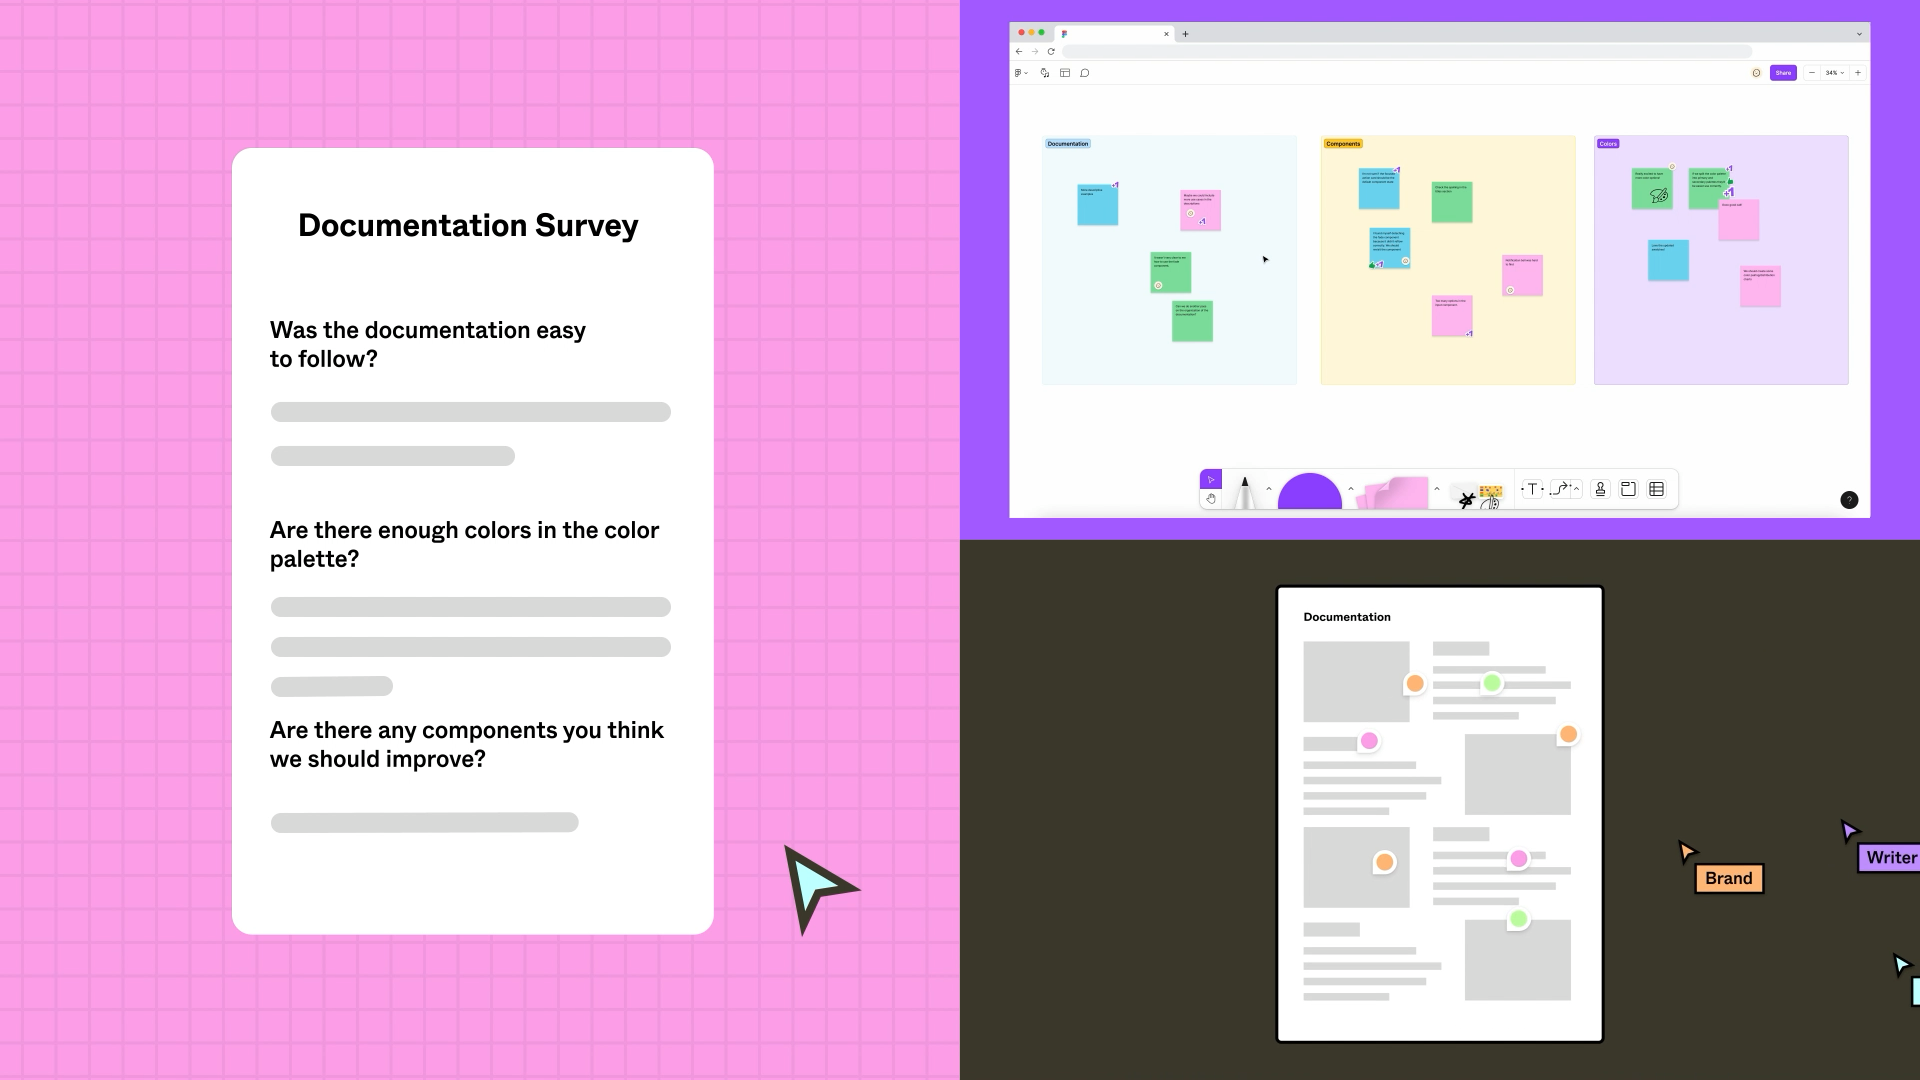 Provide_a_survey_run_a_brainstorm_or_open_up_documentatio_for_suggestions.png